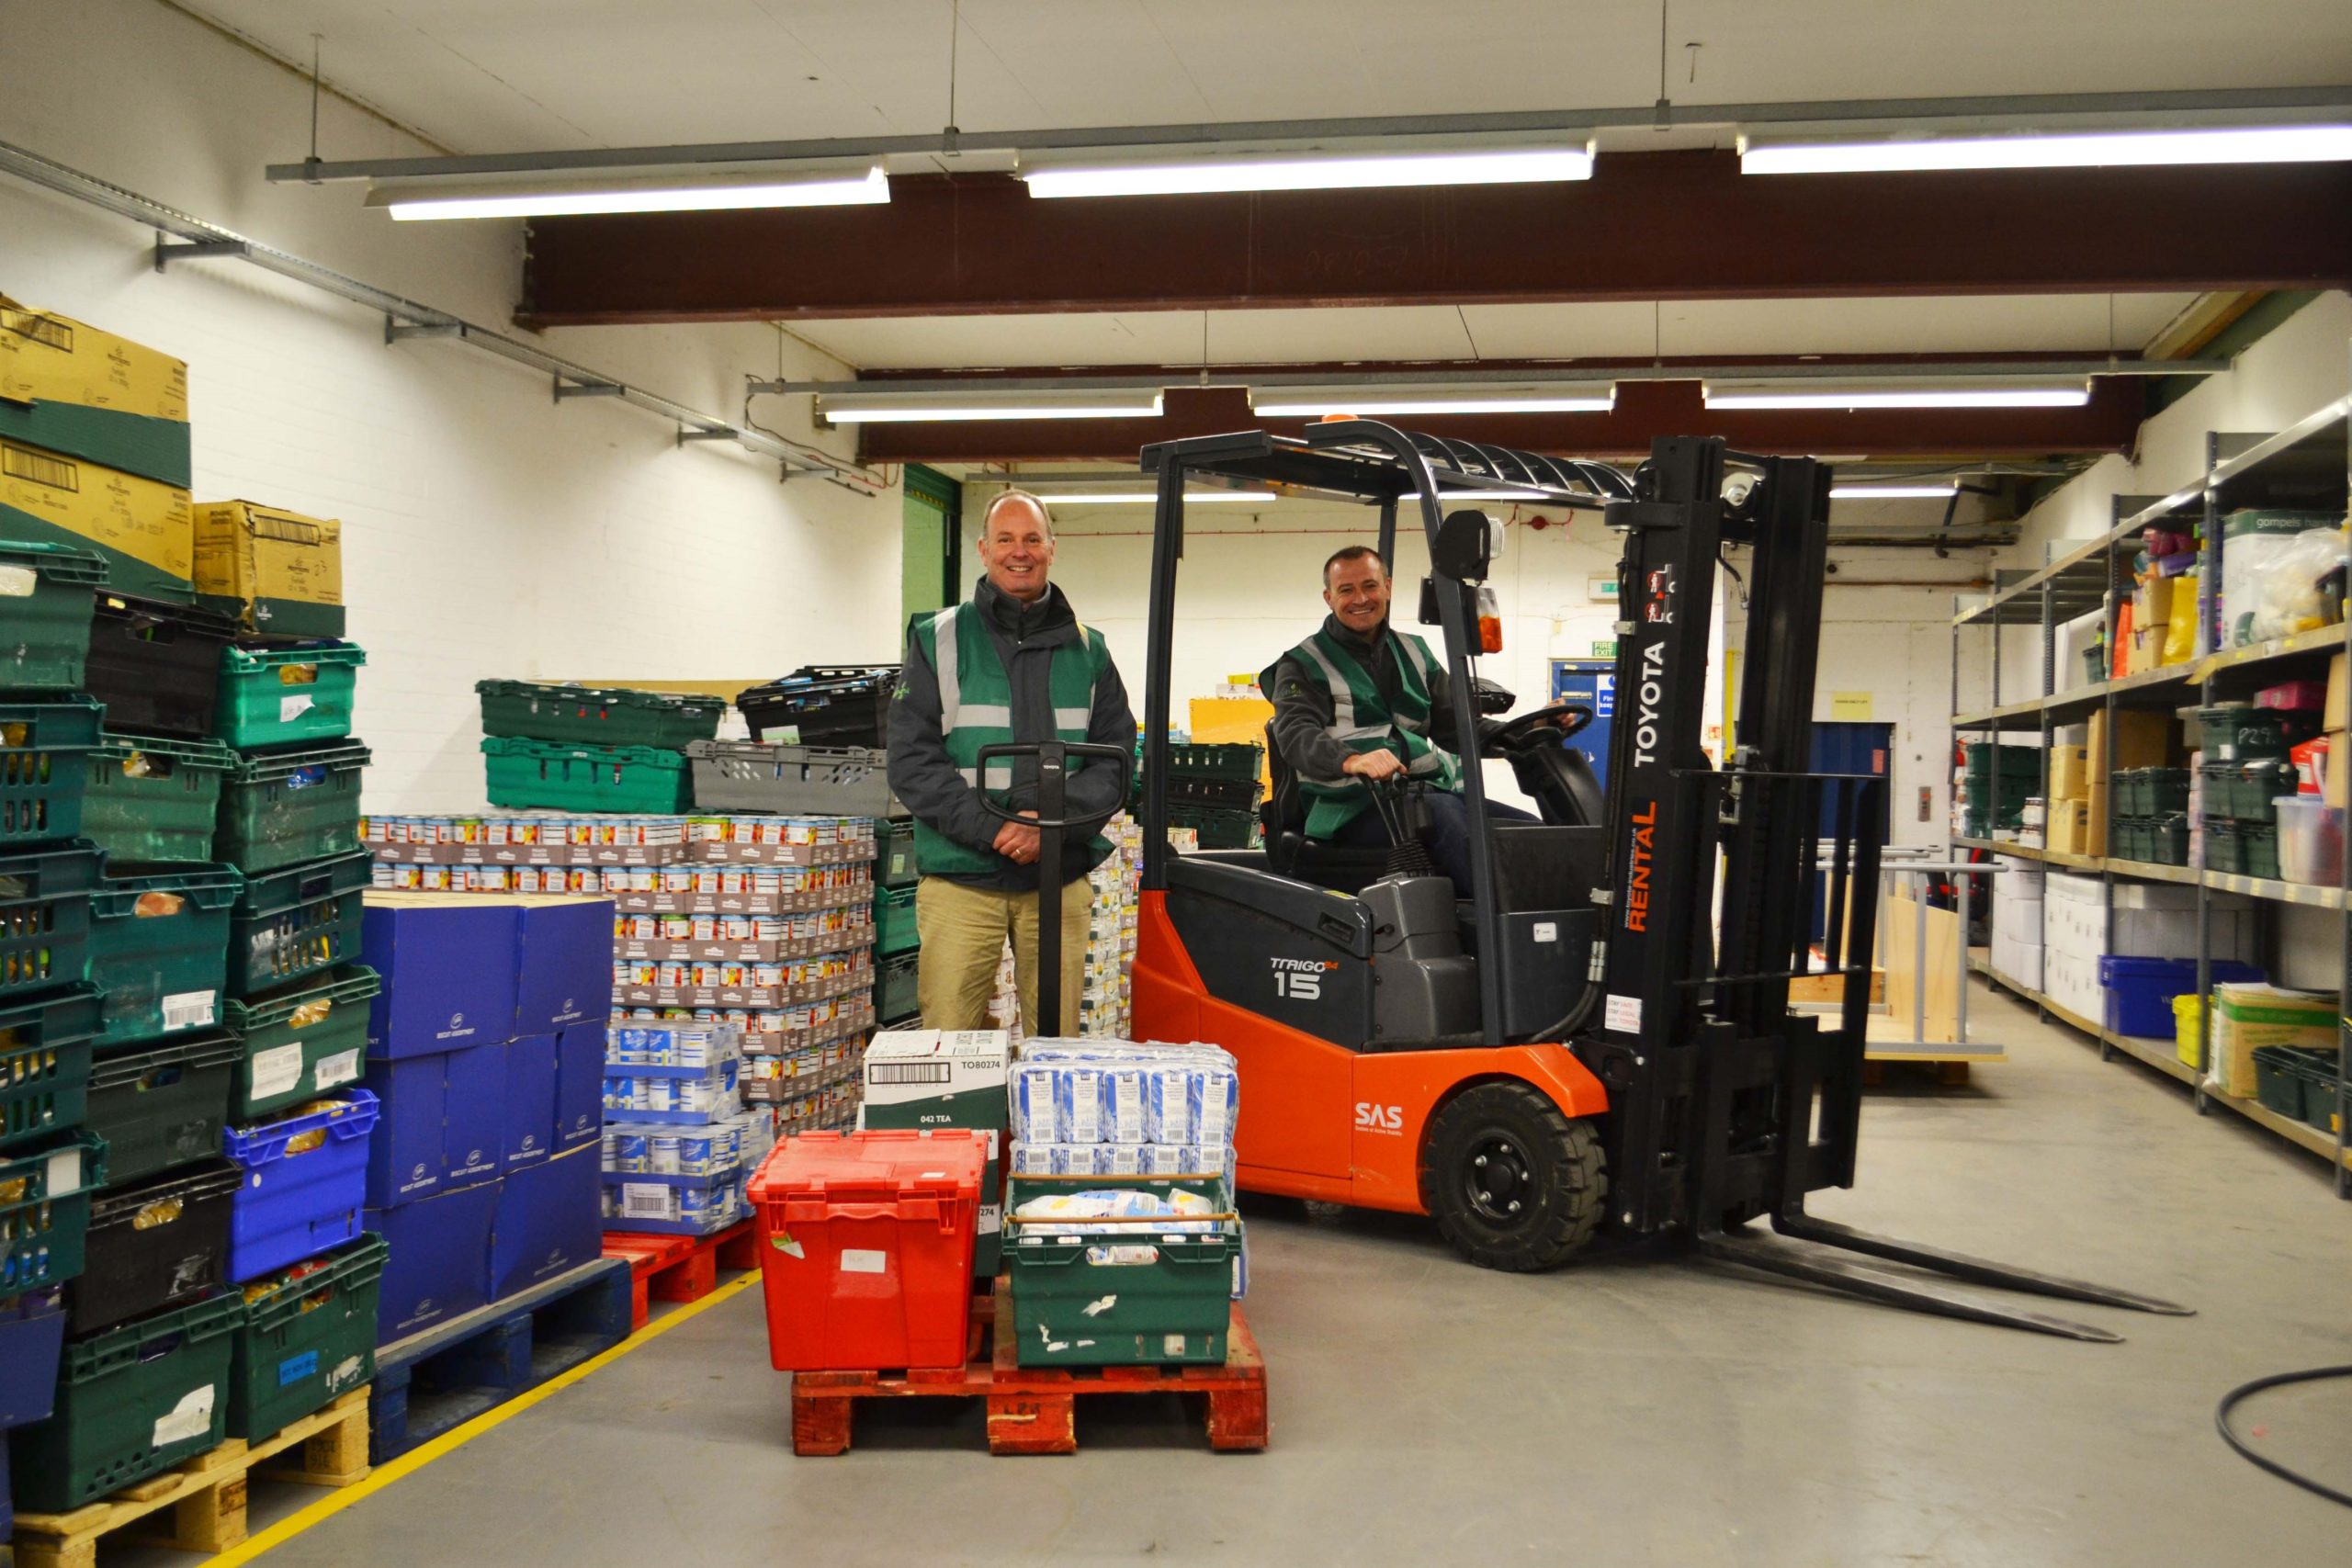 Toyota's Forklift Donation will help Foodbank to Feed More Families in Need  - Cold Chain Federation